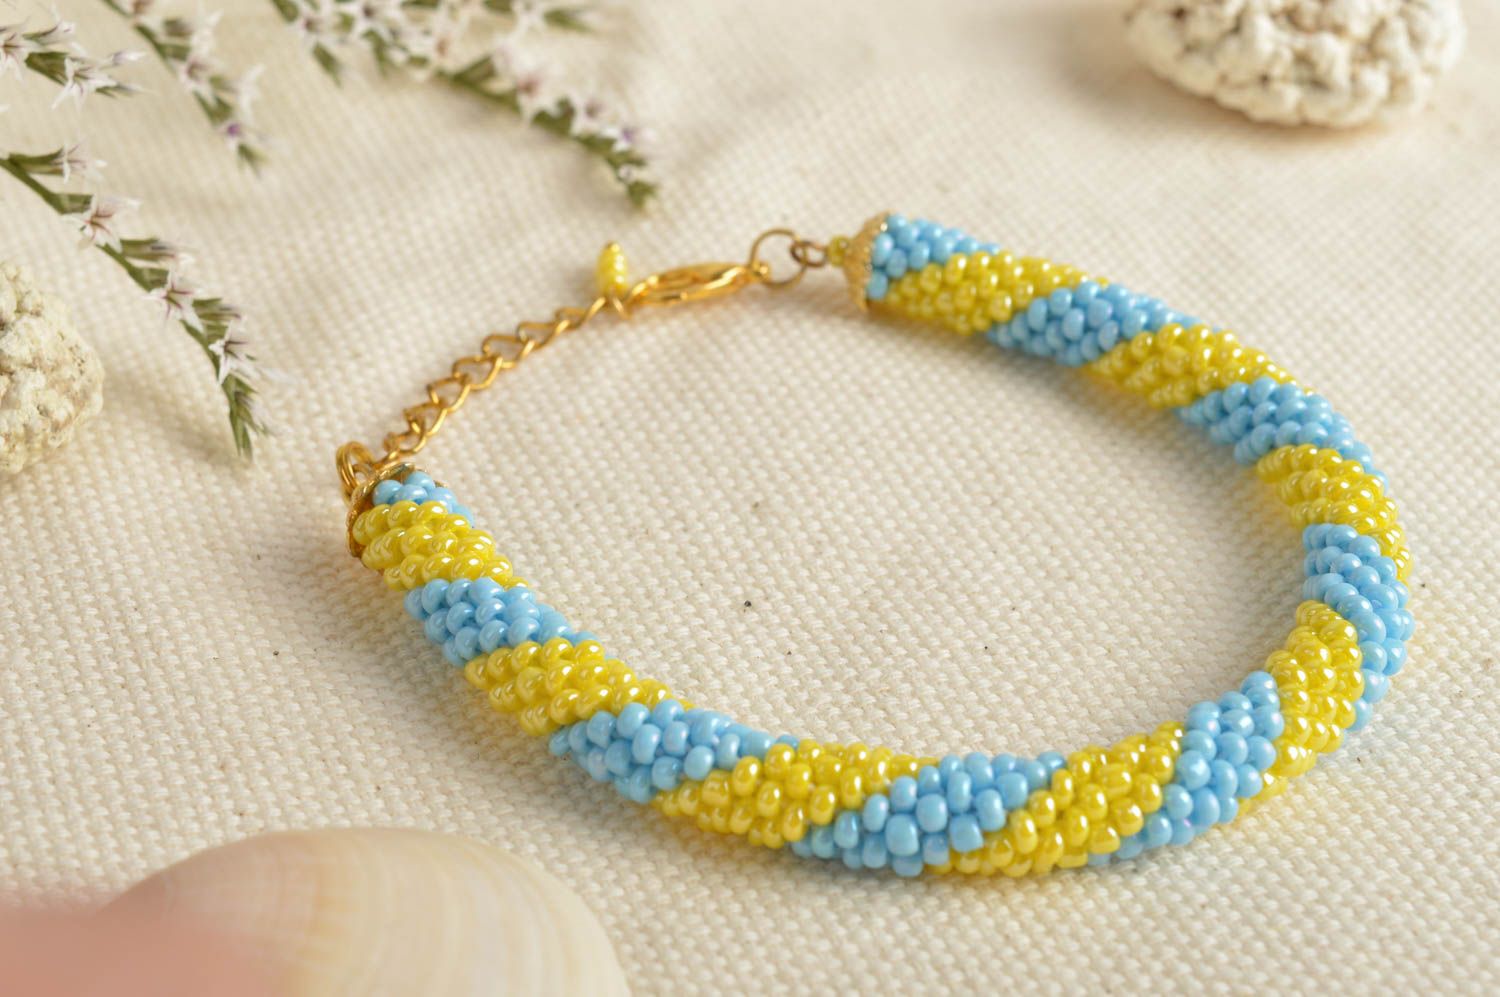 Handmade beaded cord wrist bracelet in blue and yellow colors for women photo 1